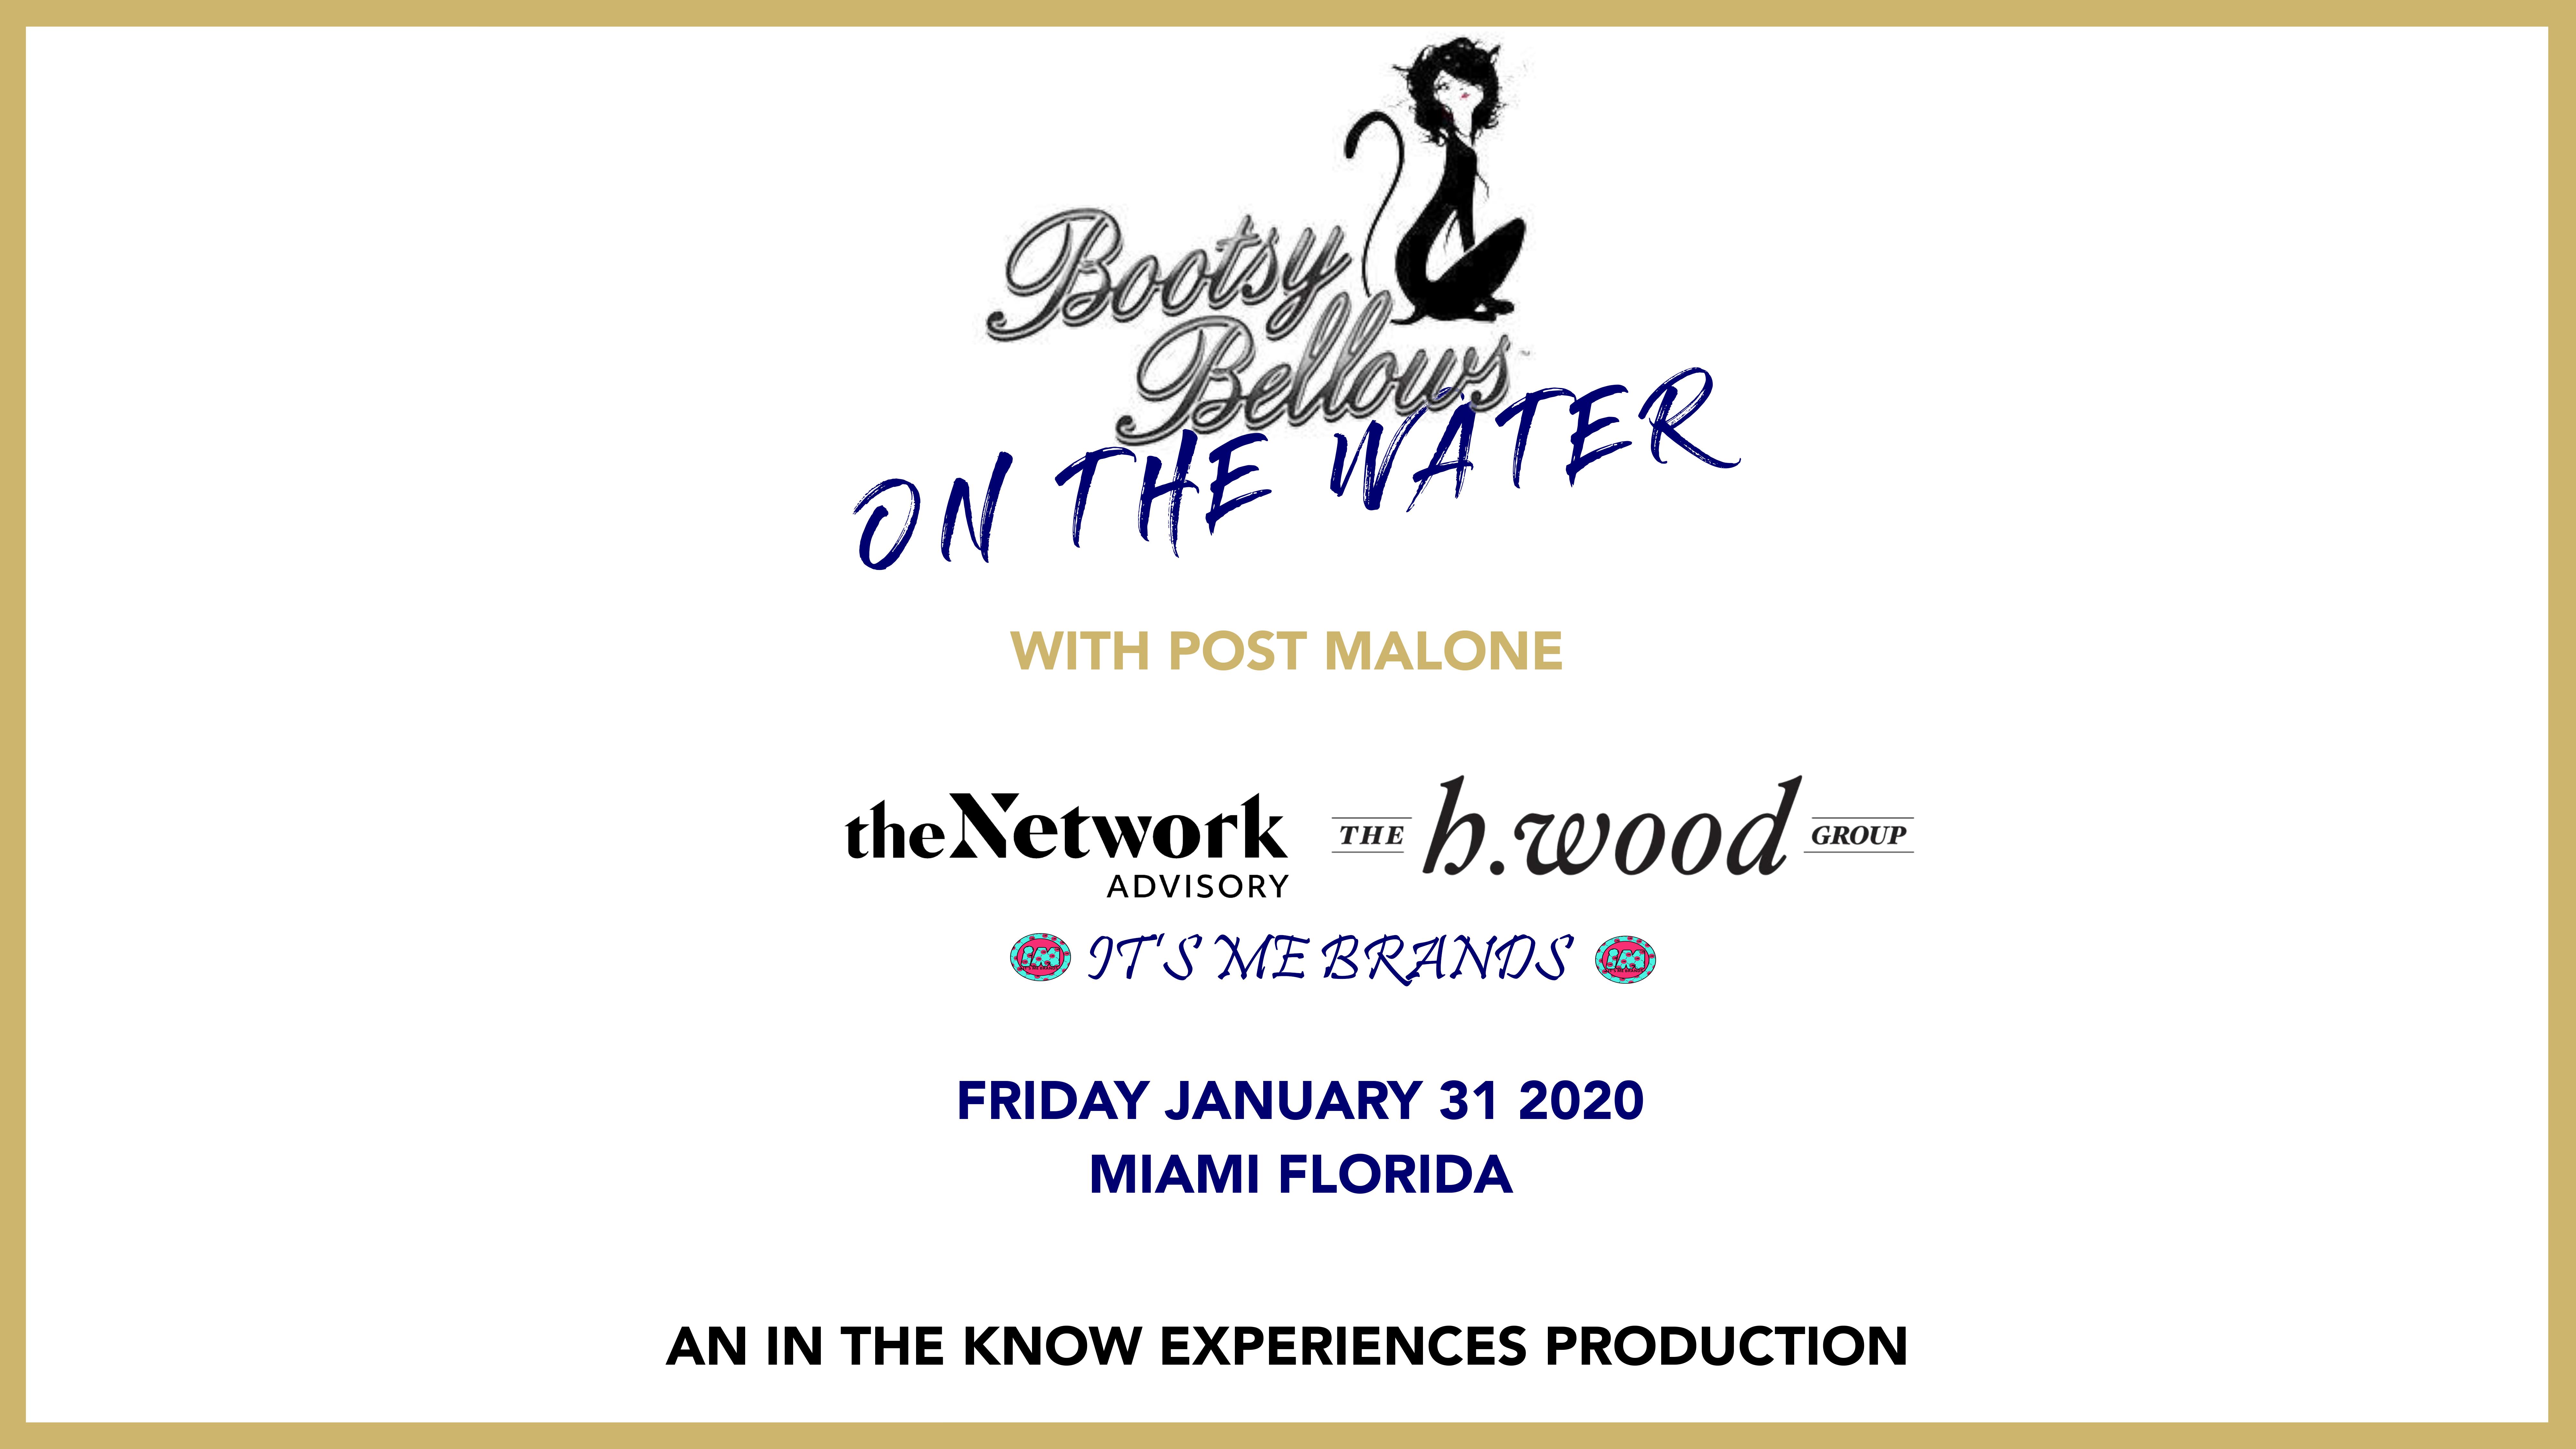  Bootsy On the Water Super Bowl Party 2020 with Post Malone